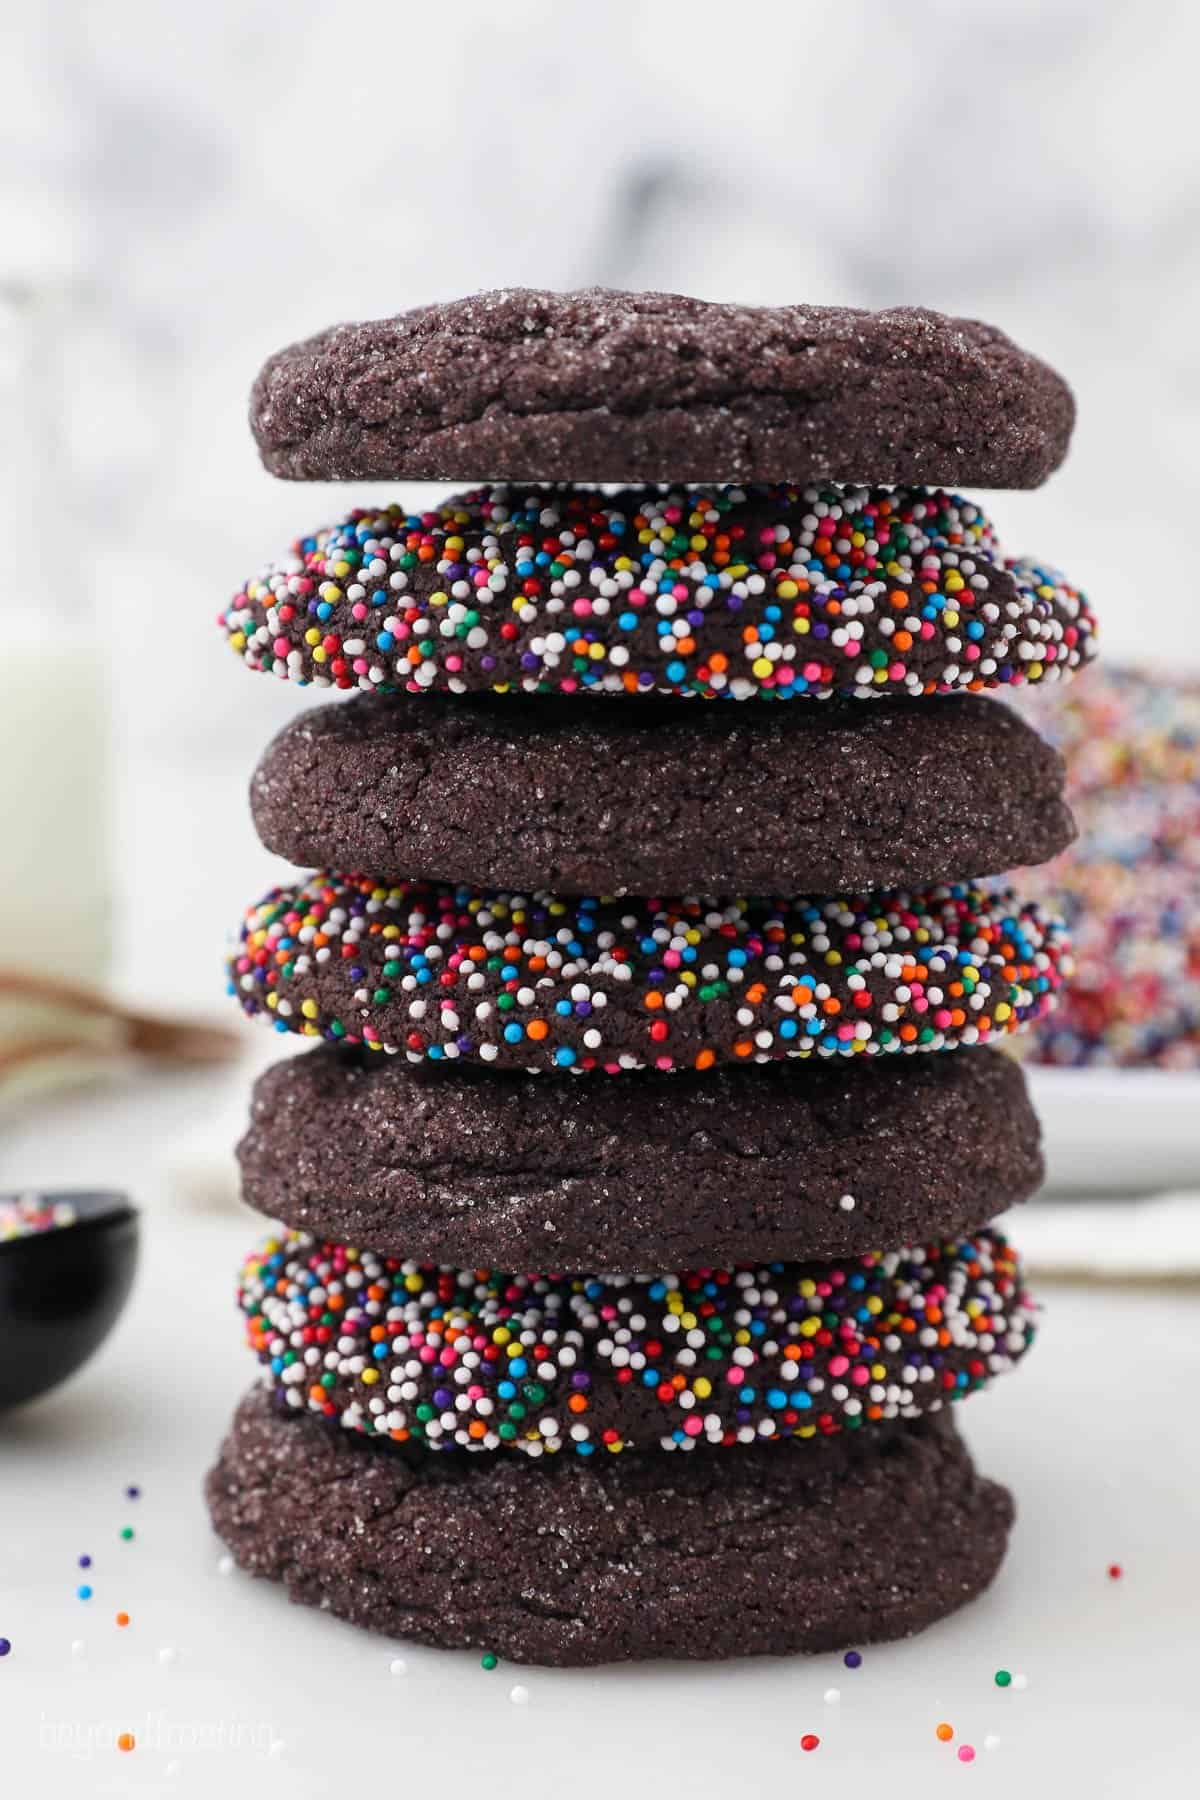 Seven chocolate sugar cookies stacked on top of one another with a bowl of rainbow sprinkles in the background